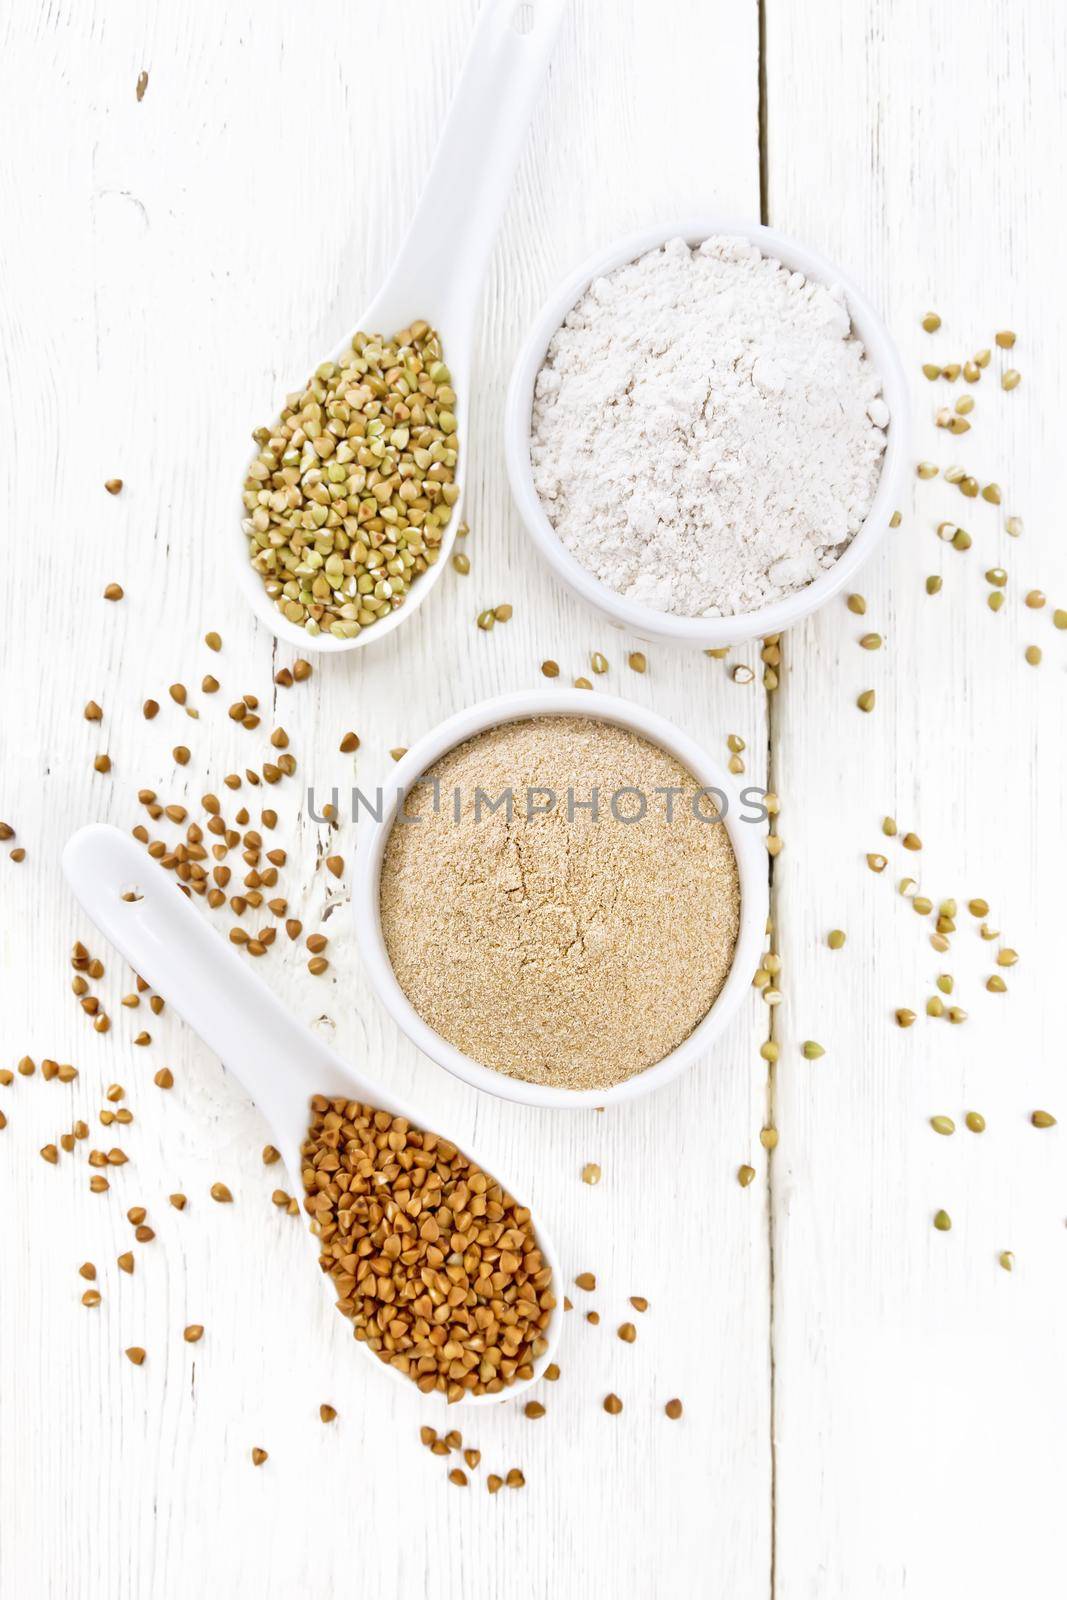 Buckwheat flour from brown and green cereals in two bowls, spoons with different buckwheat groats on the background of light wooden board from above